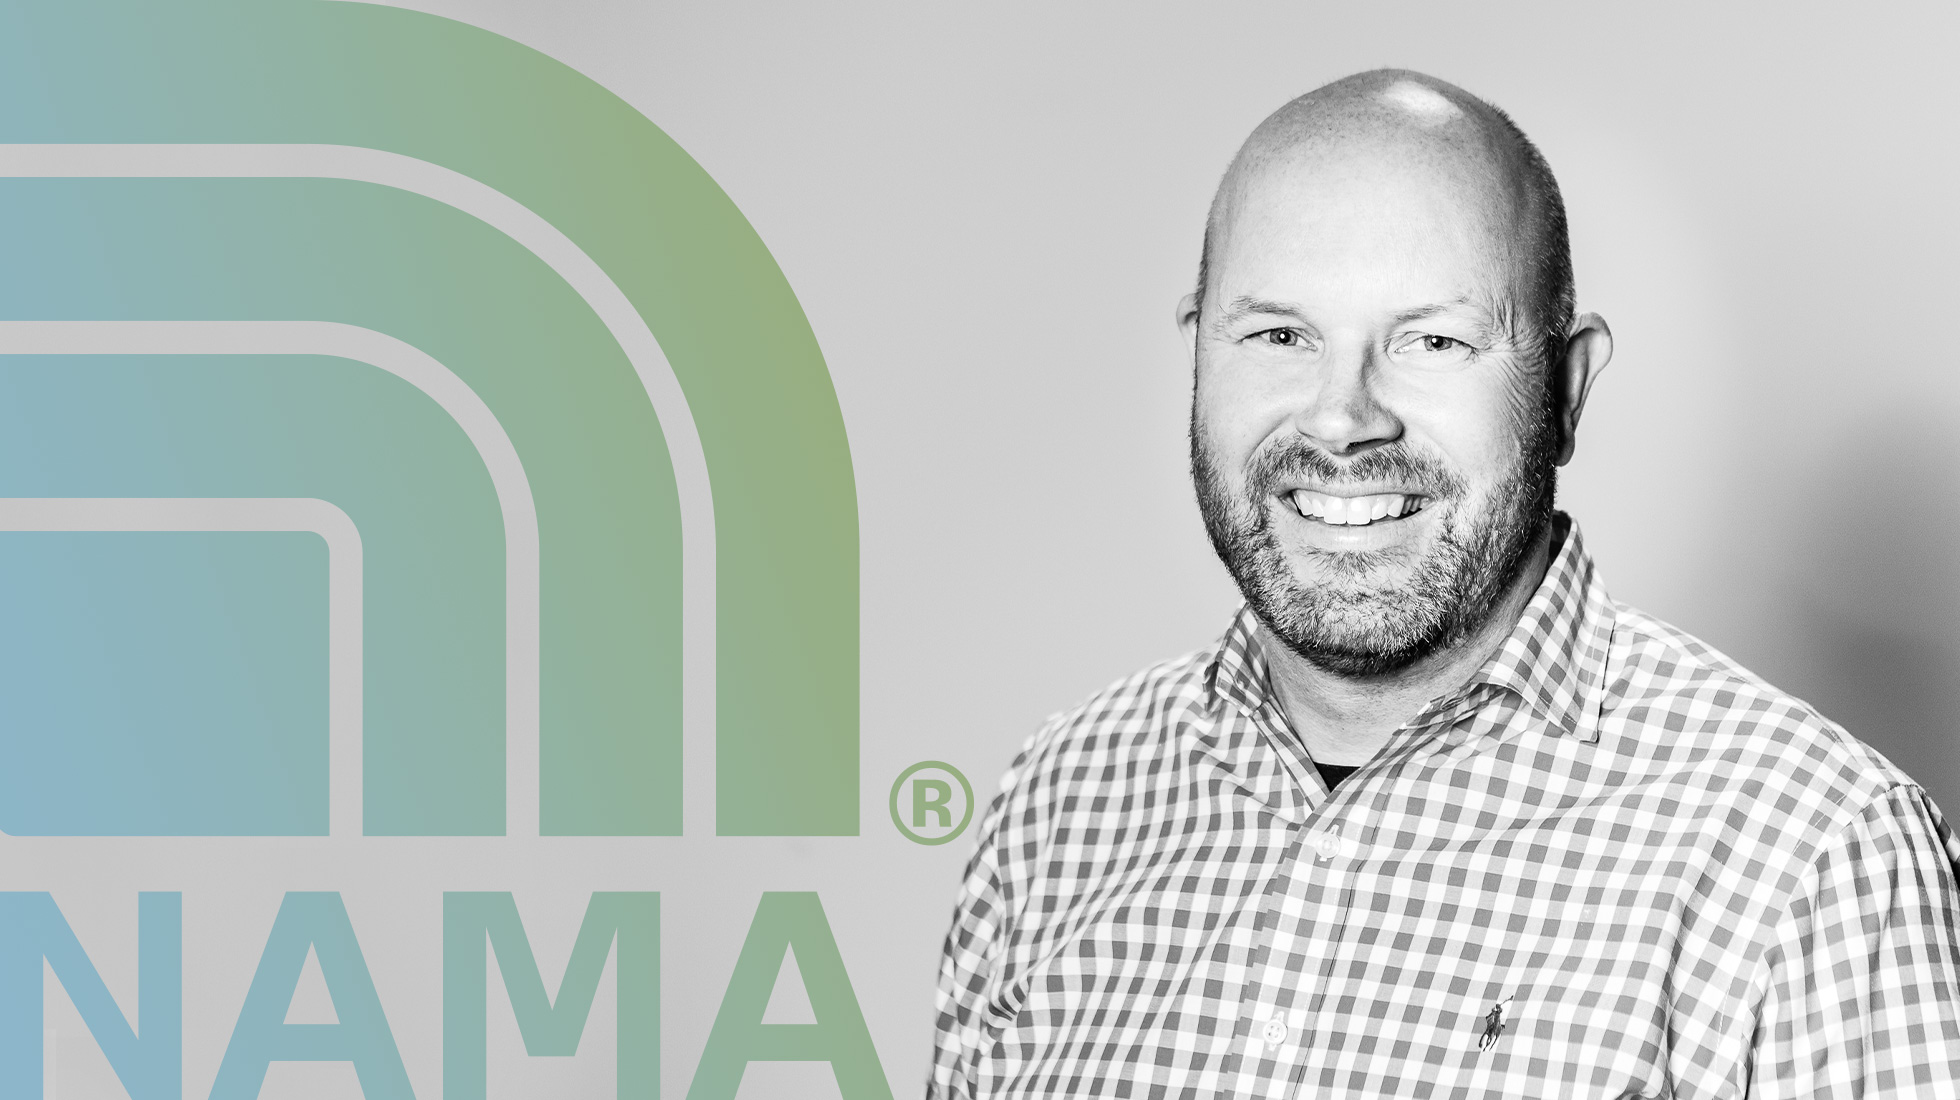 Dean Broadhead named 2019 Marketer of the Year by NAMA